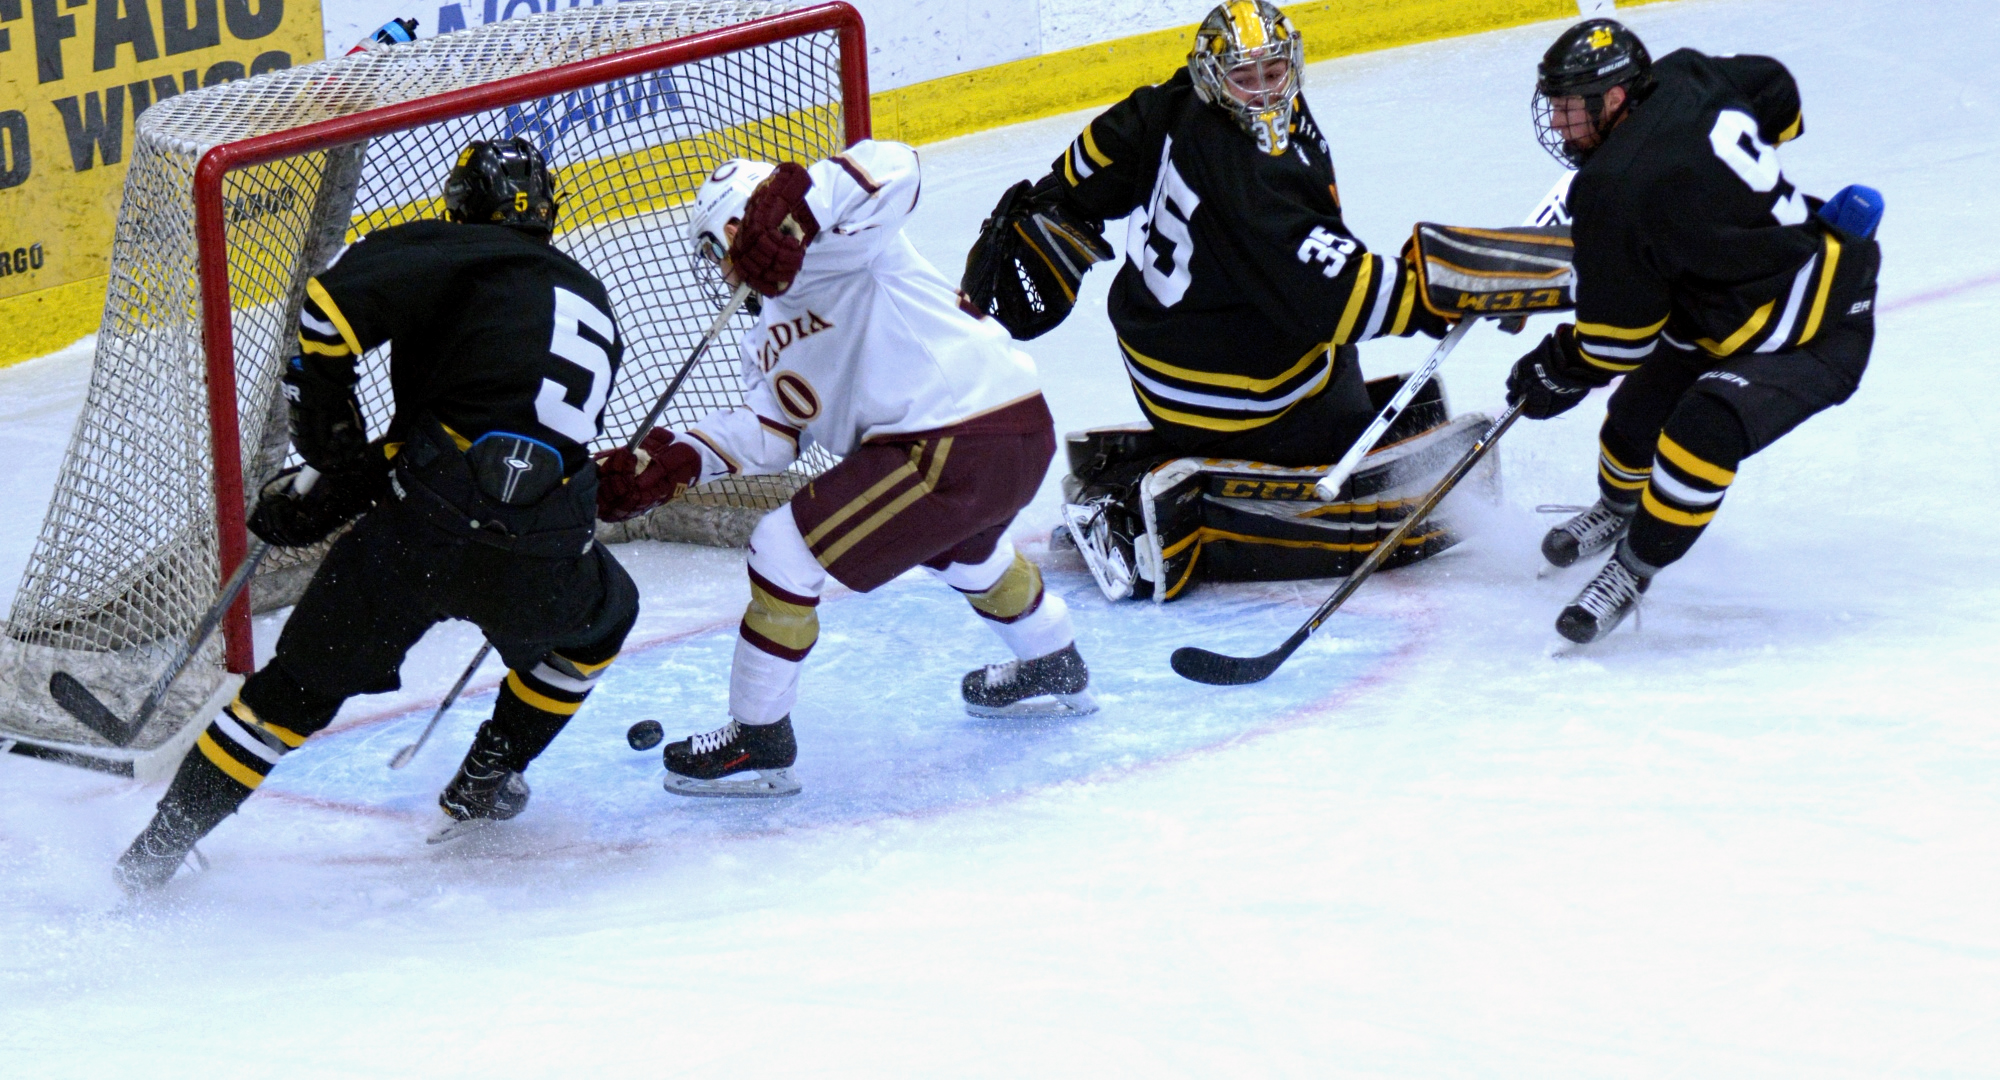 Senior Jeremy Johnson has the puck carom off his skate and into the net for the game-winning goal in the Cobbers' series opener with Gustavus.